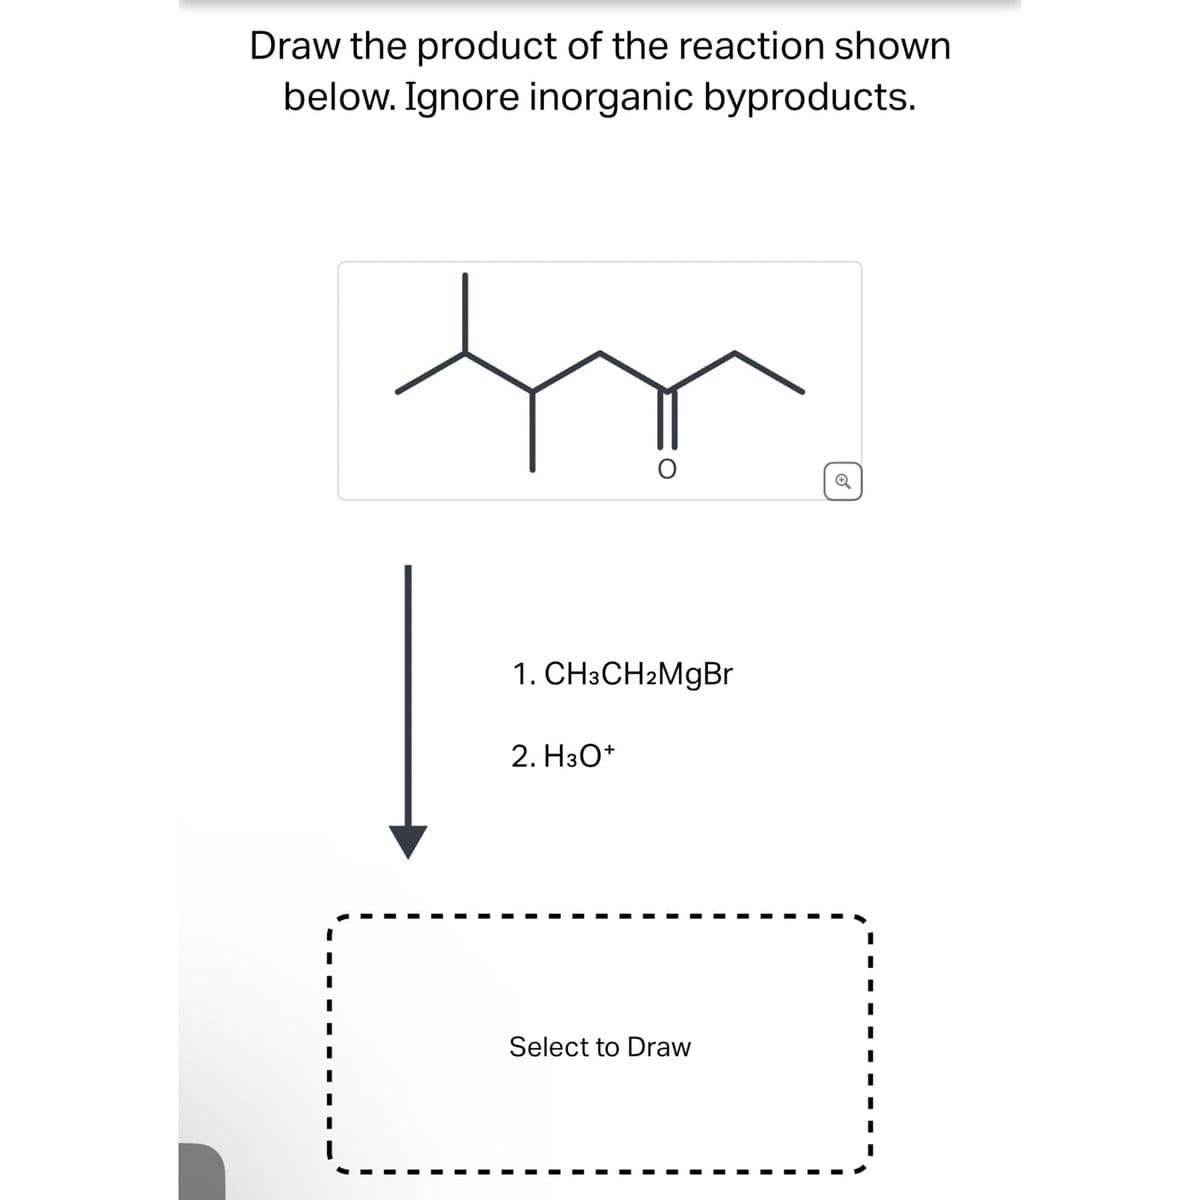 Draw the product of the reaction shown
below. Ignore inorganic byproducts.
tr.
I
I
I
I
I
1.CH3CH2MgBr
2. H3O+
I
I
I
I
Select to Draw
I
I
I
I
I
I
I
I
I
1